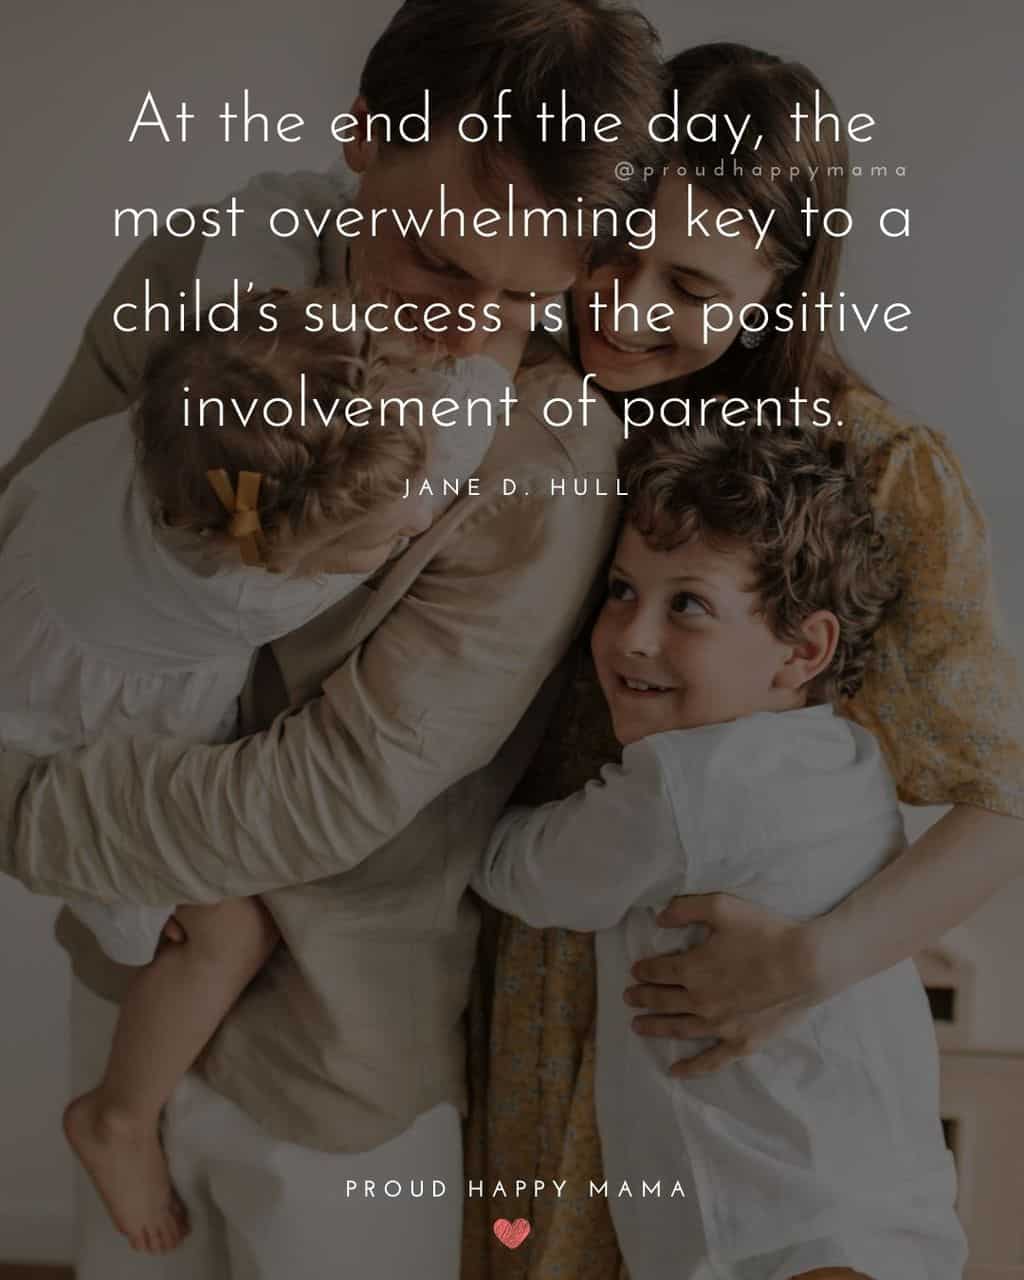 Parenting Quotes - At the end of the day, the most overwhelming key to a child’s success is the positive involvement of parents.’ – Jane D.